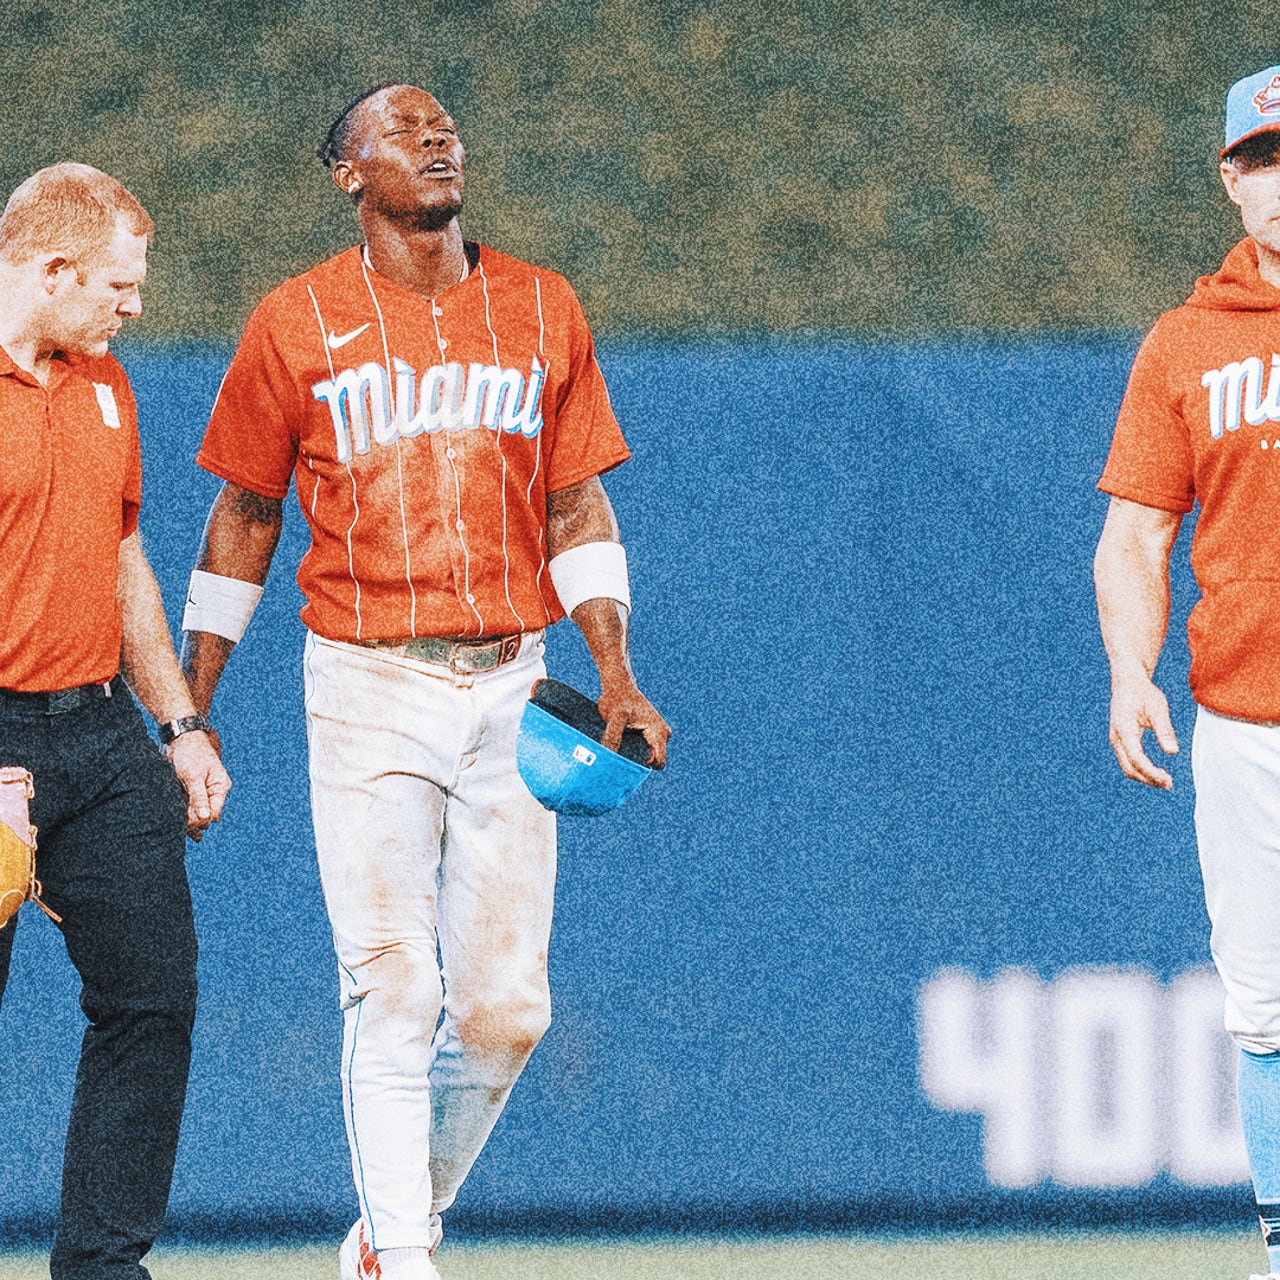 Marlins star outfielder Jazz Chisholm Jr. headed to the injured